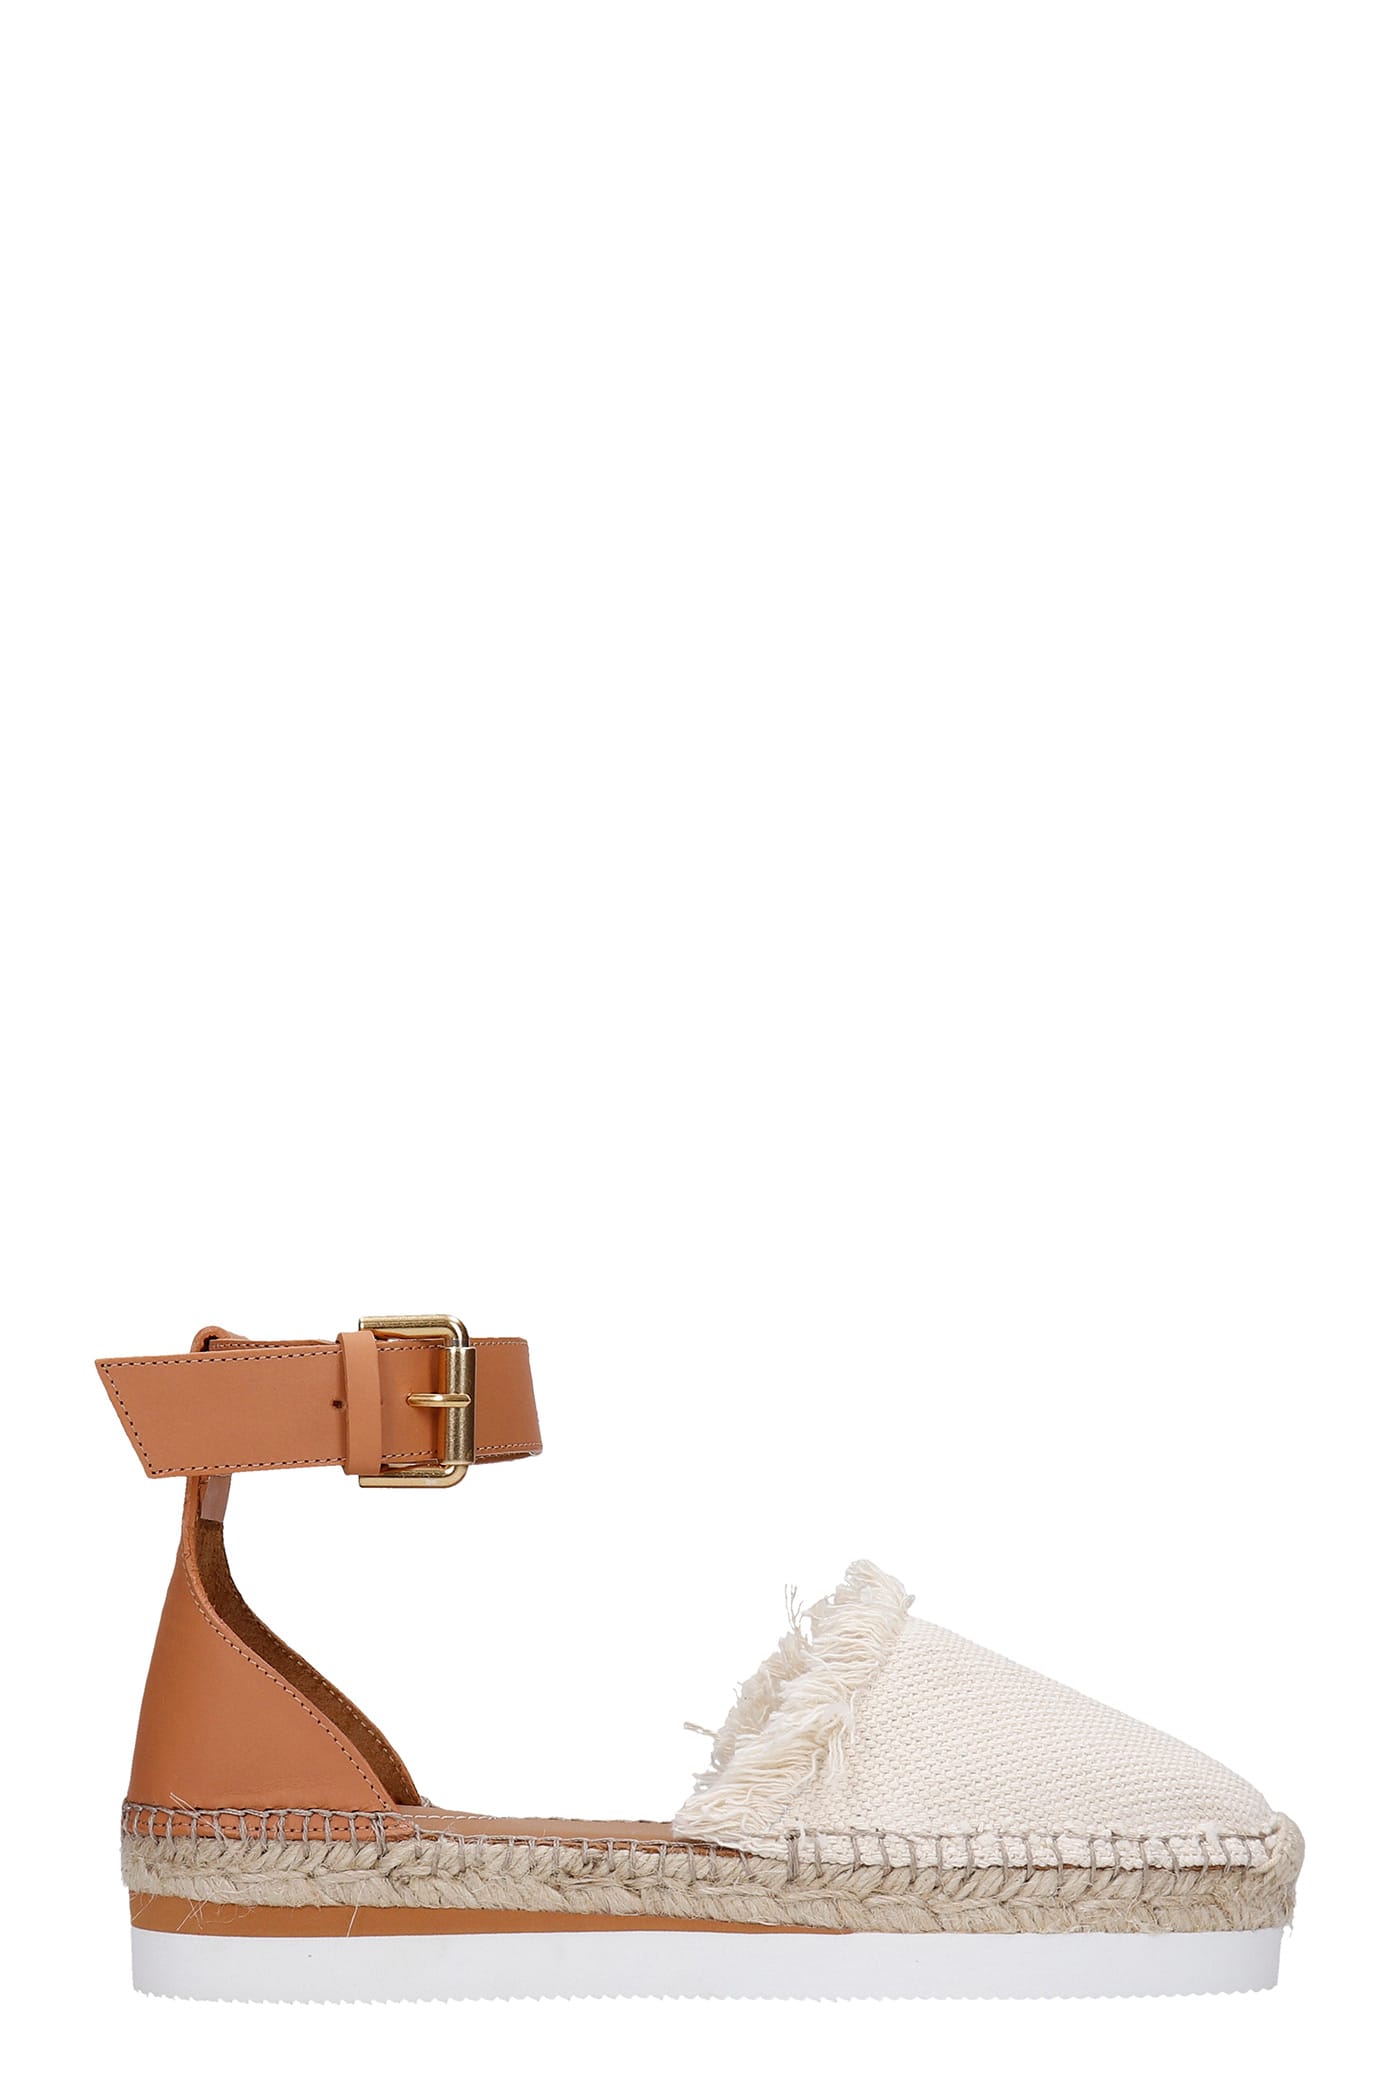 See by Chloé Glyn Espadrilles In Leather Color Leather And Fabric